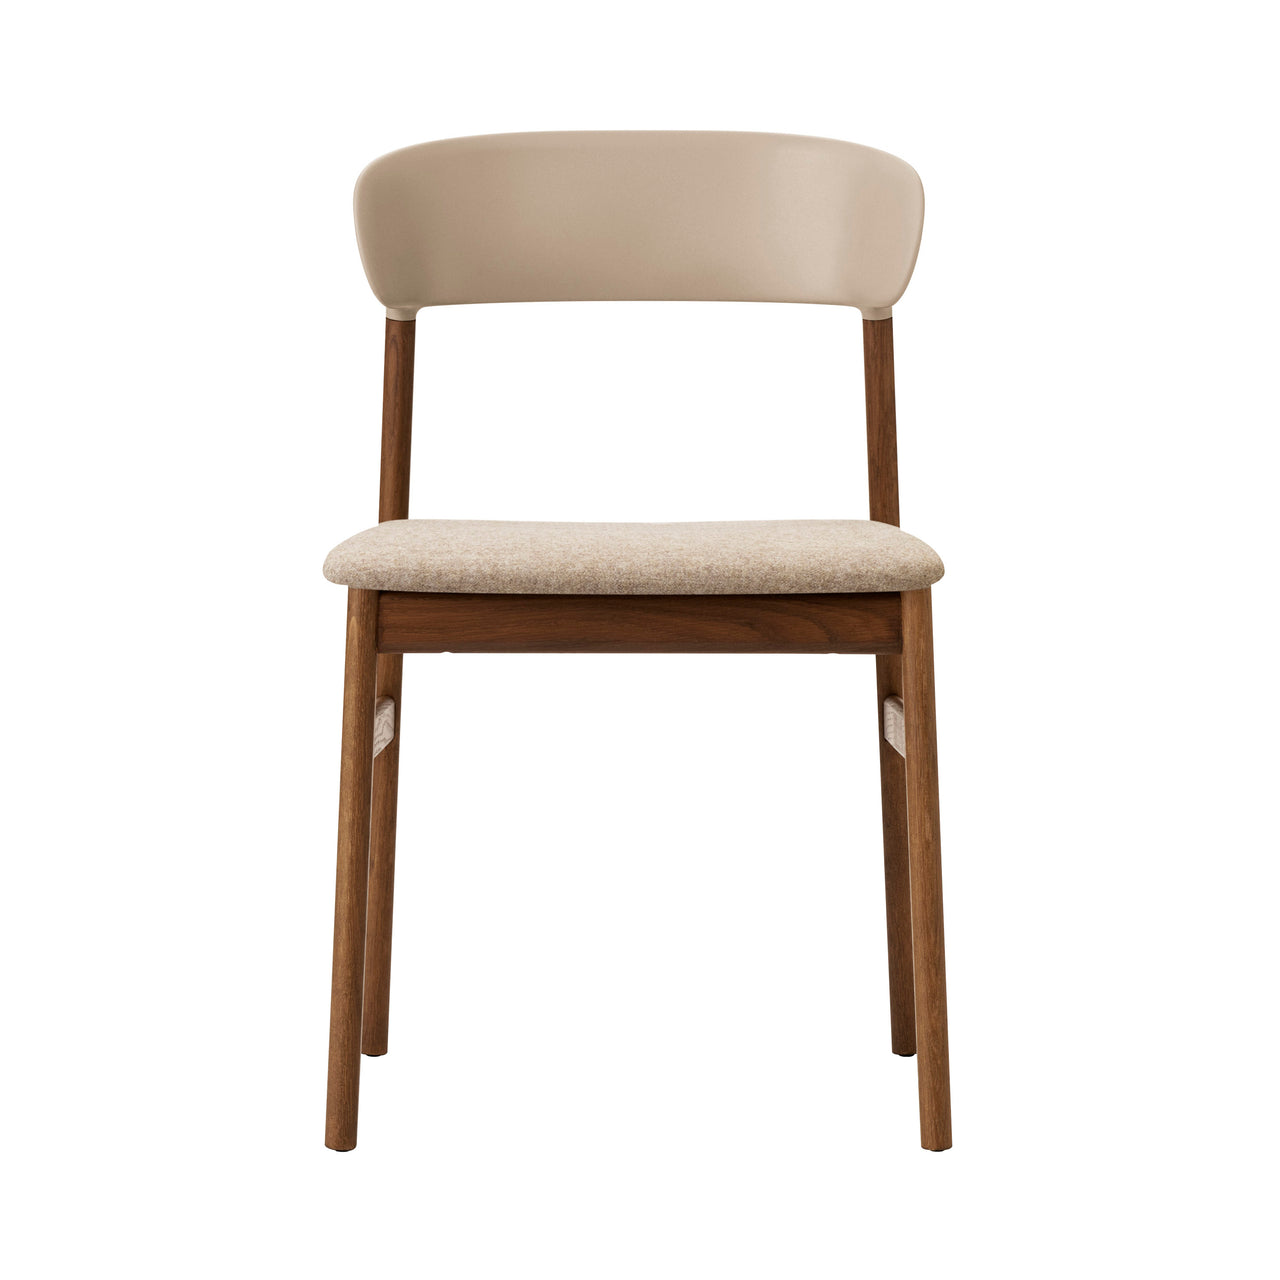 Herit Chair: Upholstered + Smoked Oak + Sand + Synergy Sand